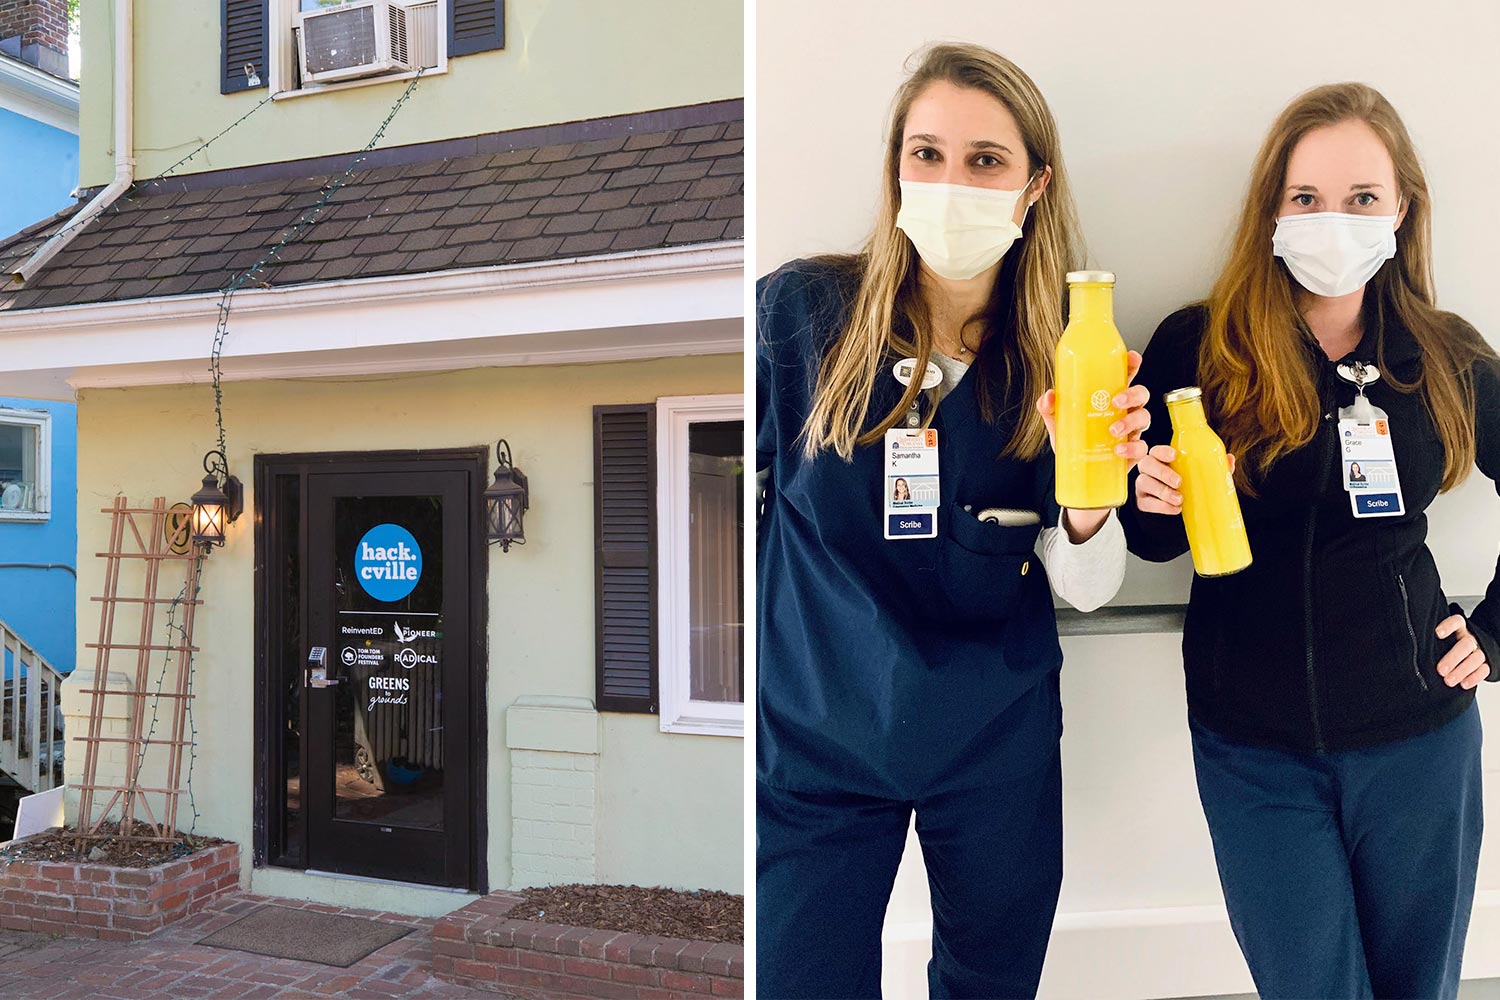 Left: business door that reads Hack. cville. Right: to UVA workers holding yellow beverages posing for the camera